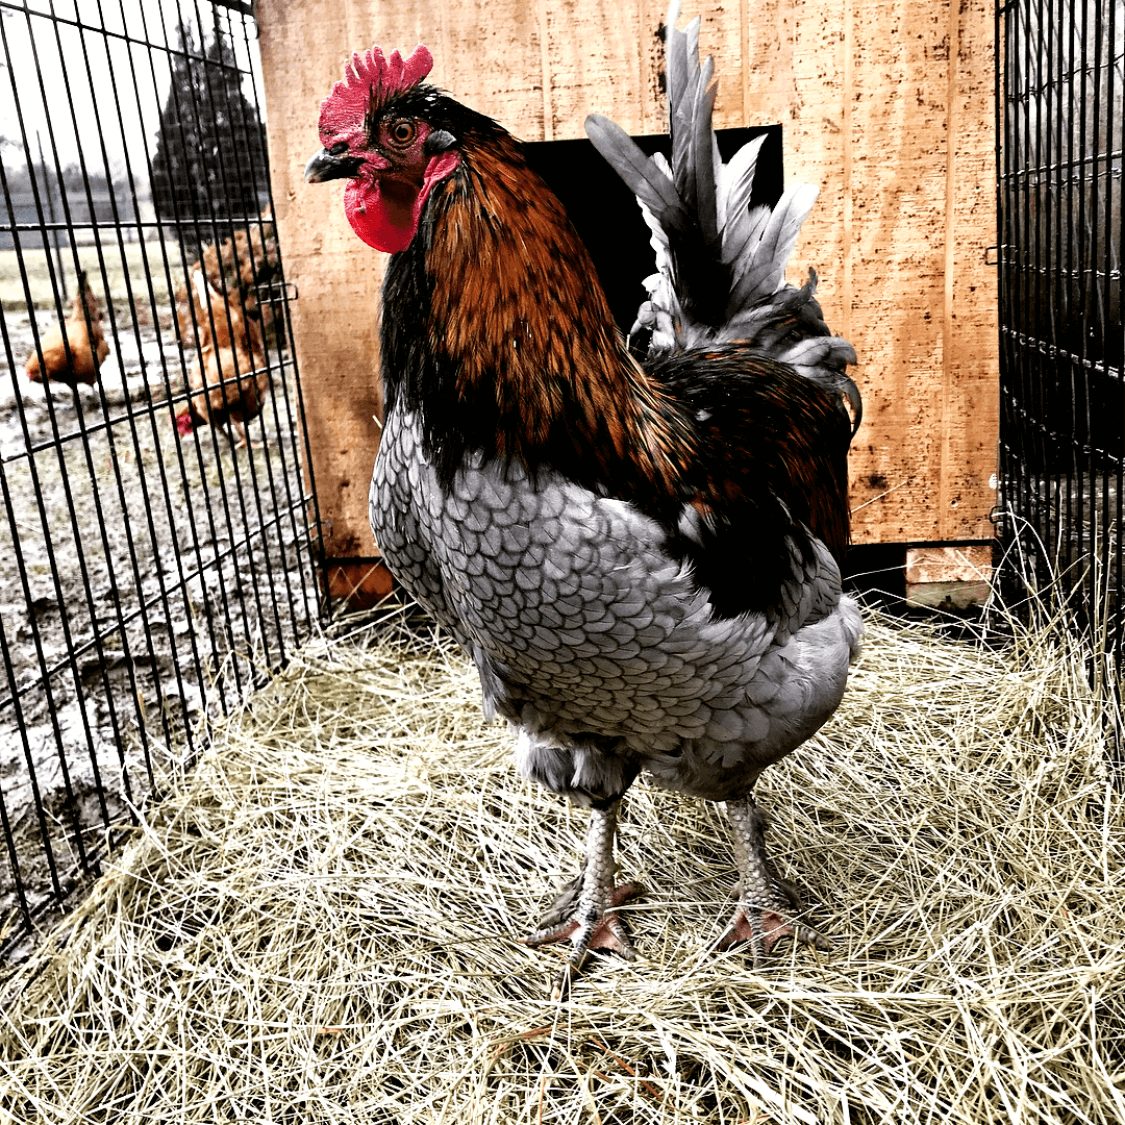 Can A Rooster Keep Hens From Laying?